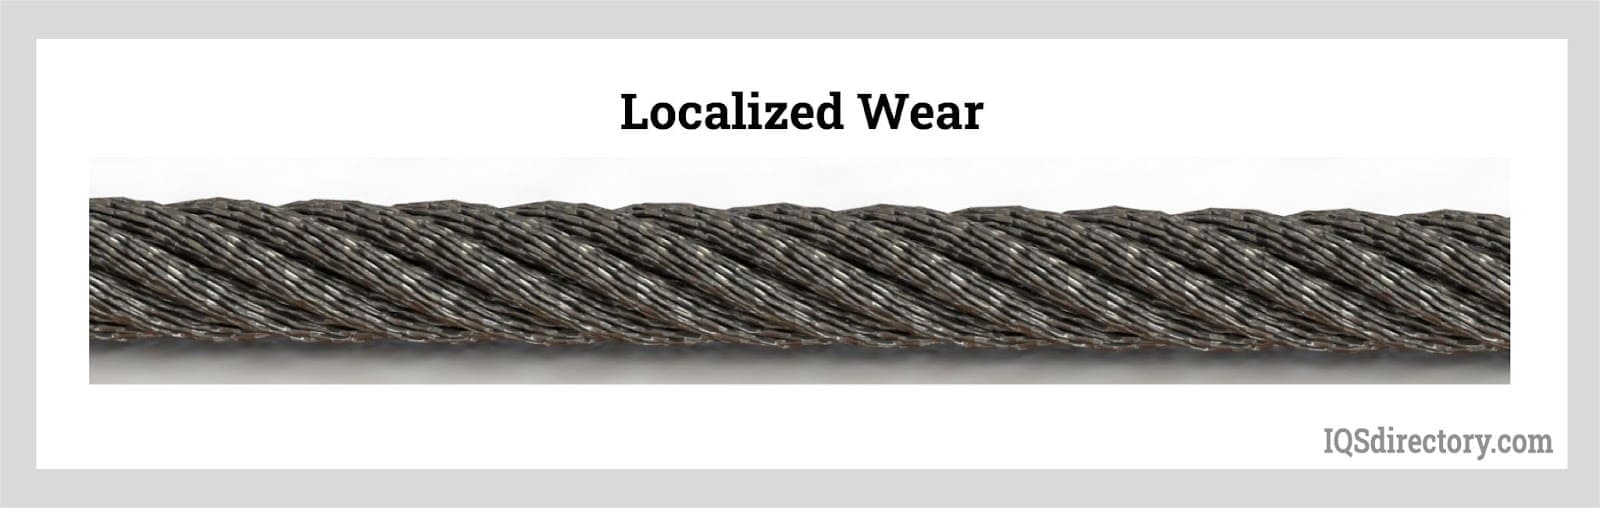 https://www.iqsdirectory.com/articles/wire-rope/localized-wear.jpg